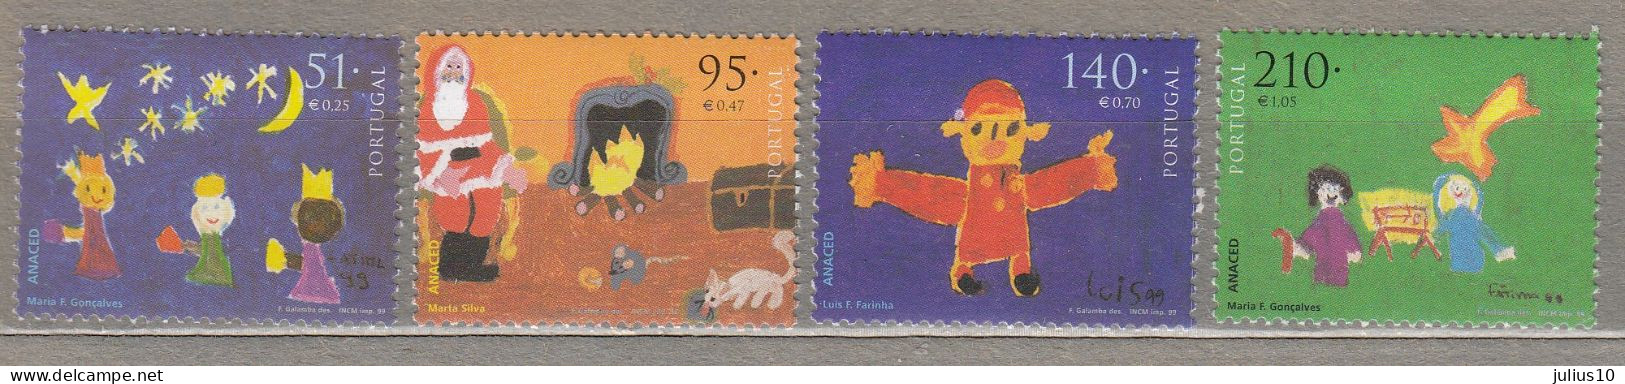 PORTUGAL 1999 Children Drawings MNH (**) Mi 2380-2383 #24132 - Unused Stamps